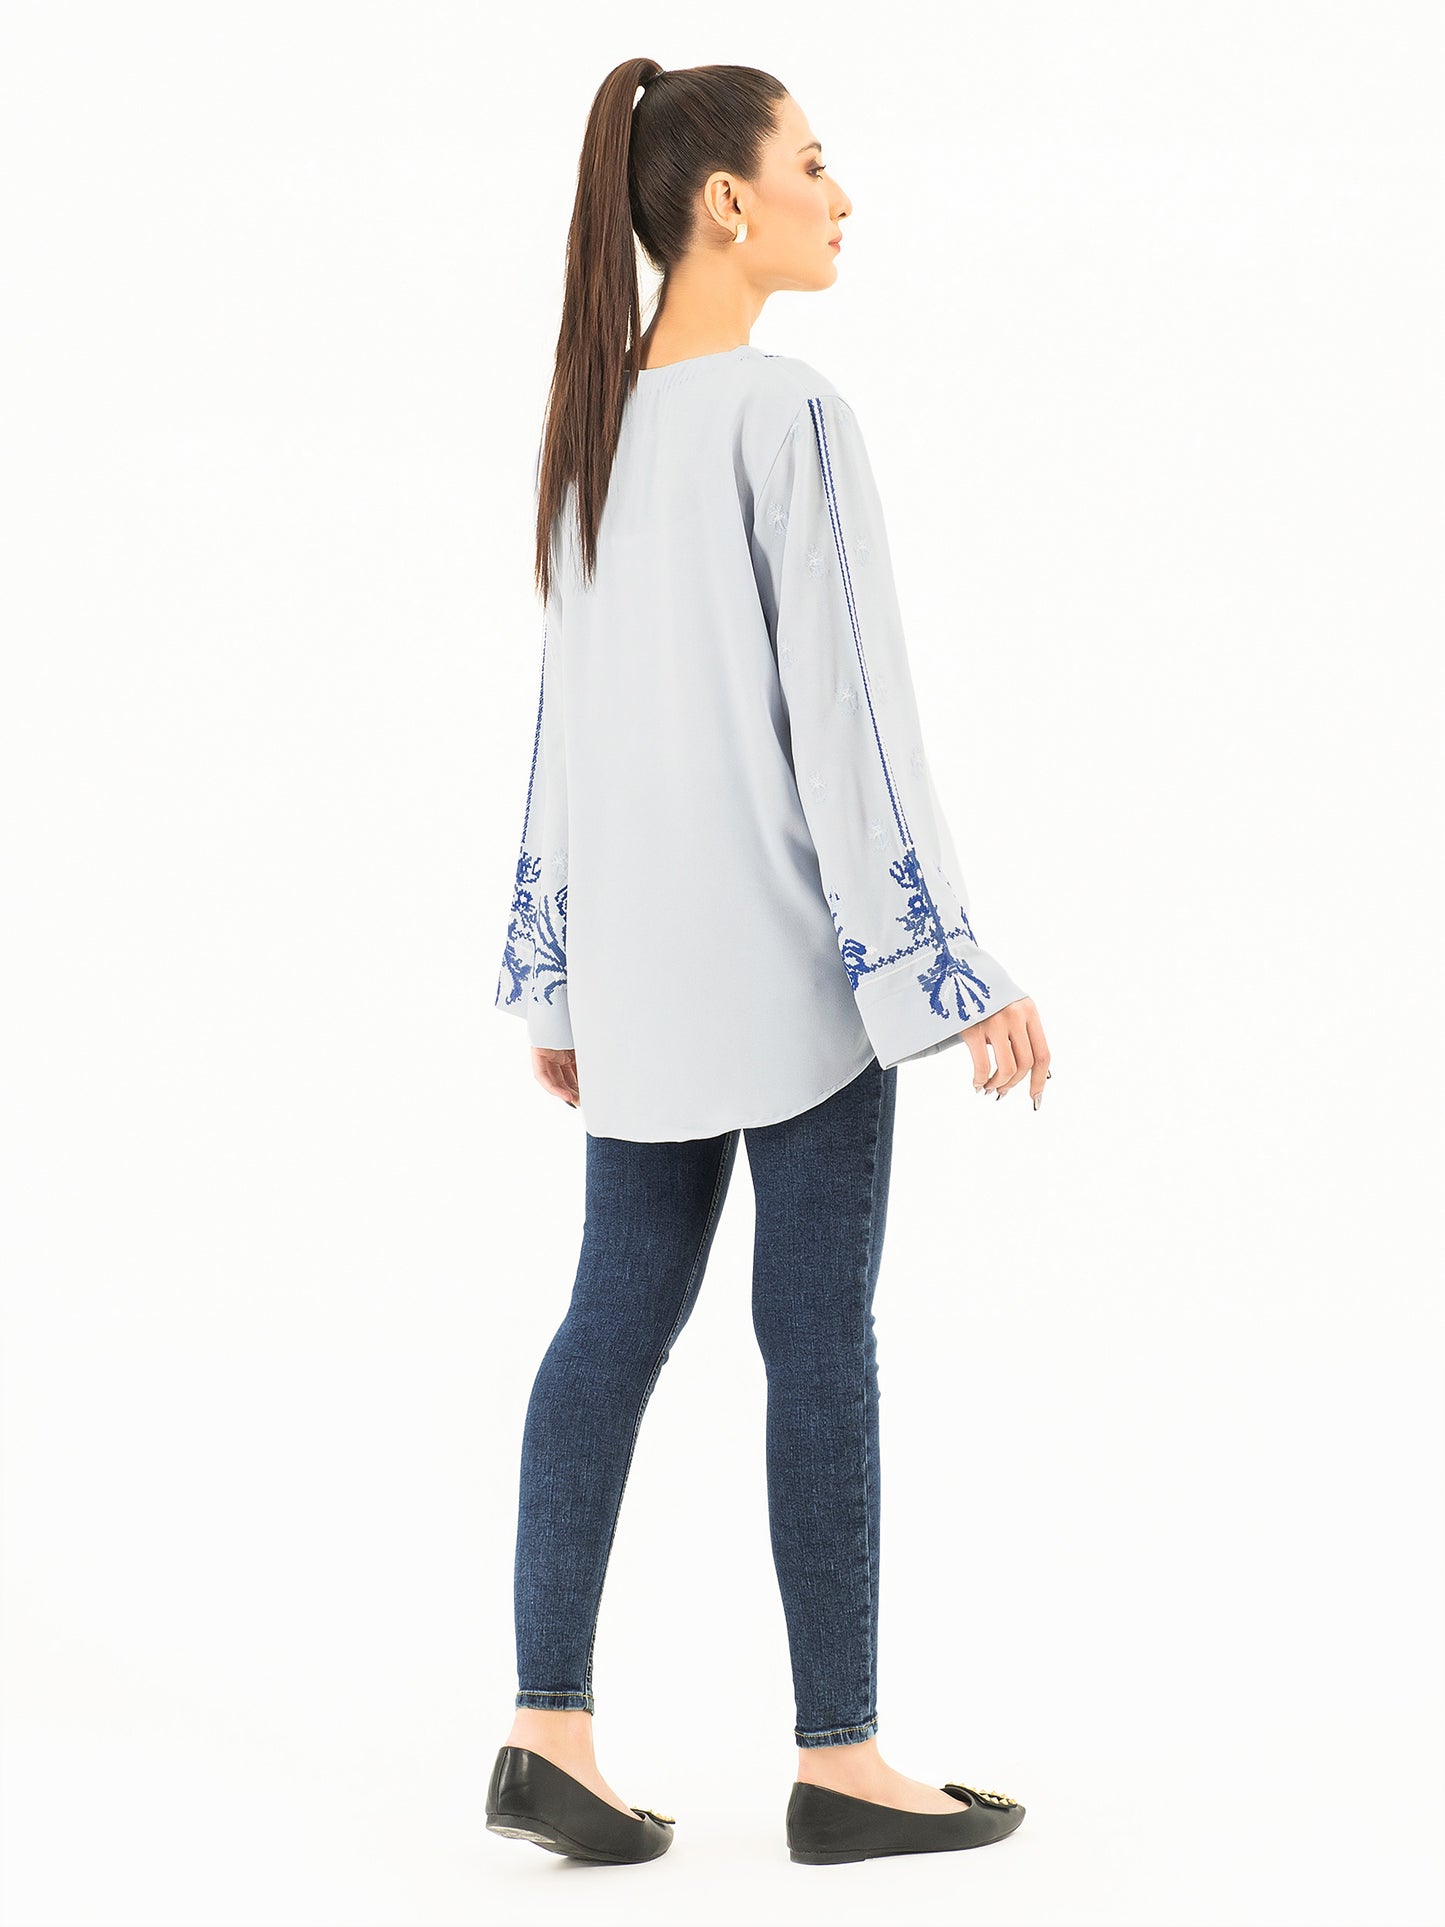 Embroidered Grip Top (Pret)